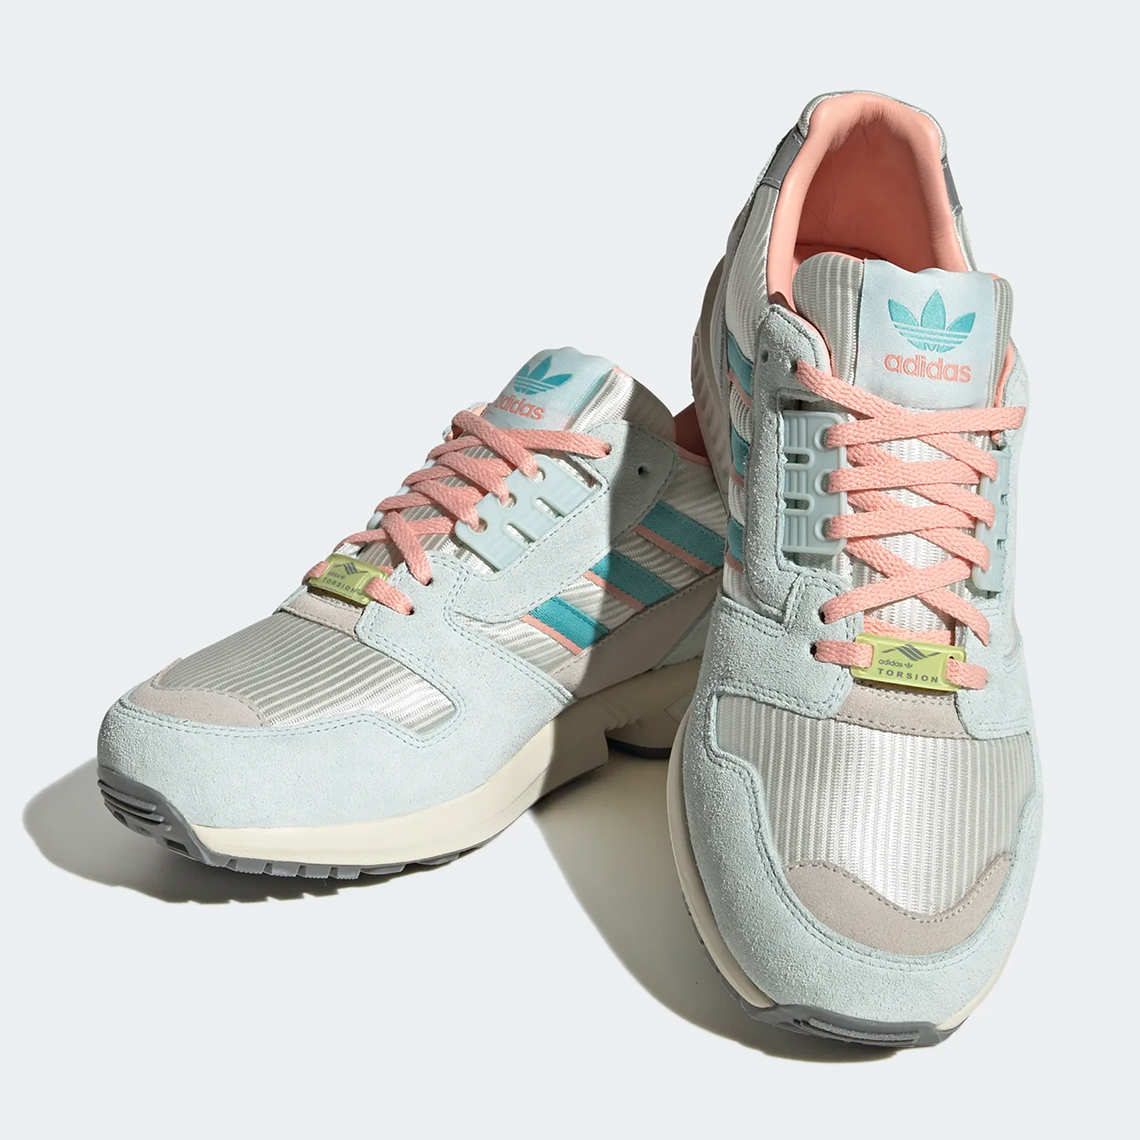 Adidas Zx 8000 Ice Mint Trace Pink Cream White If5382 5